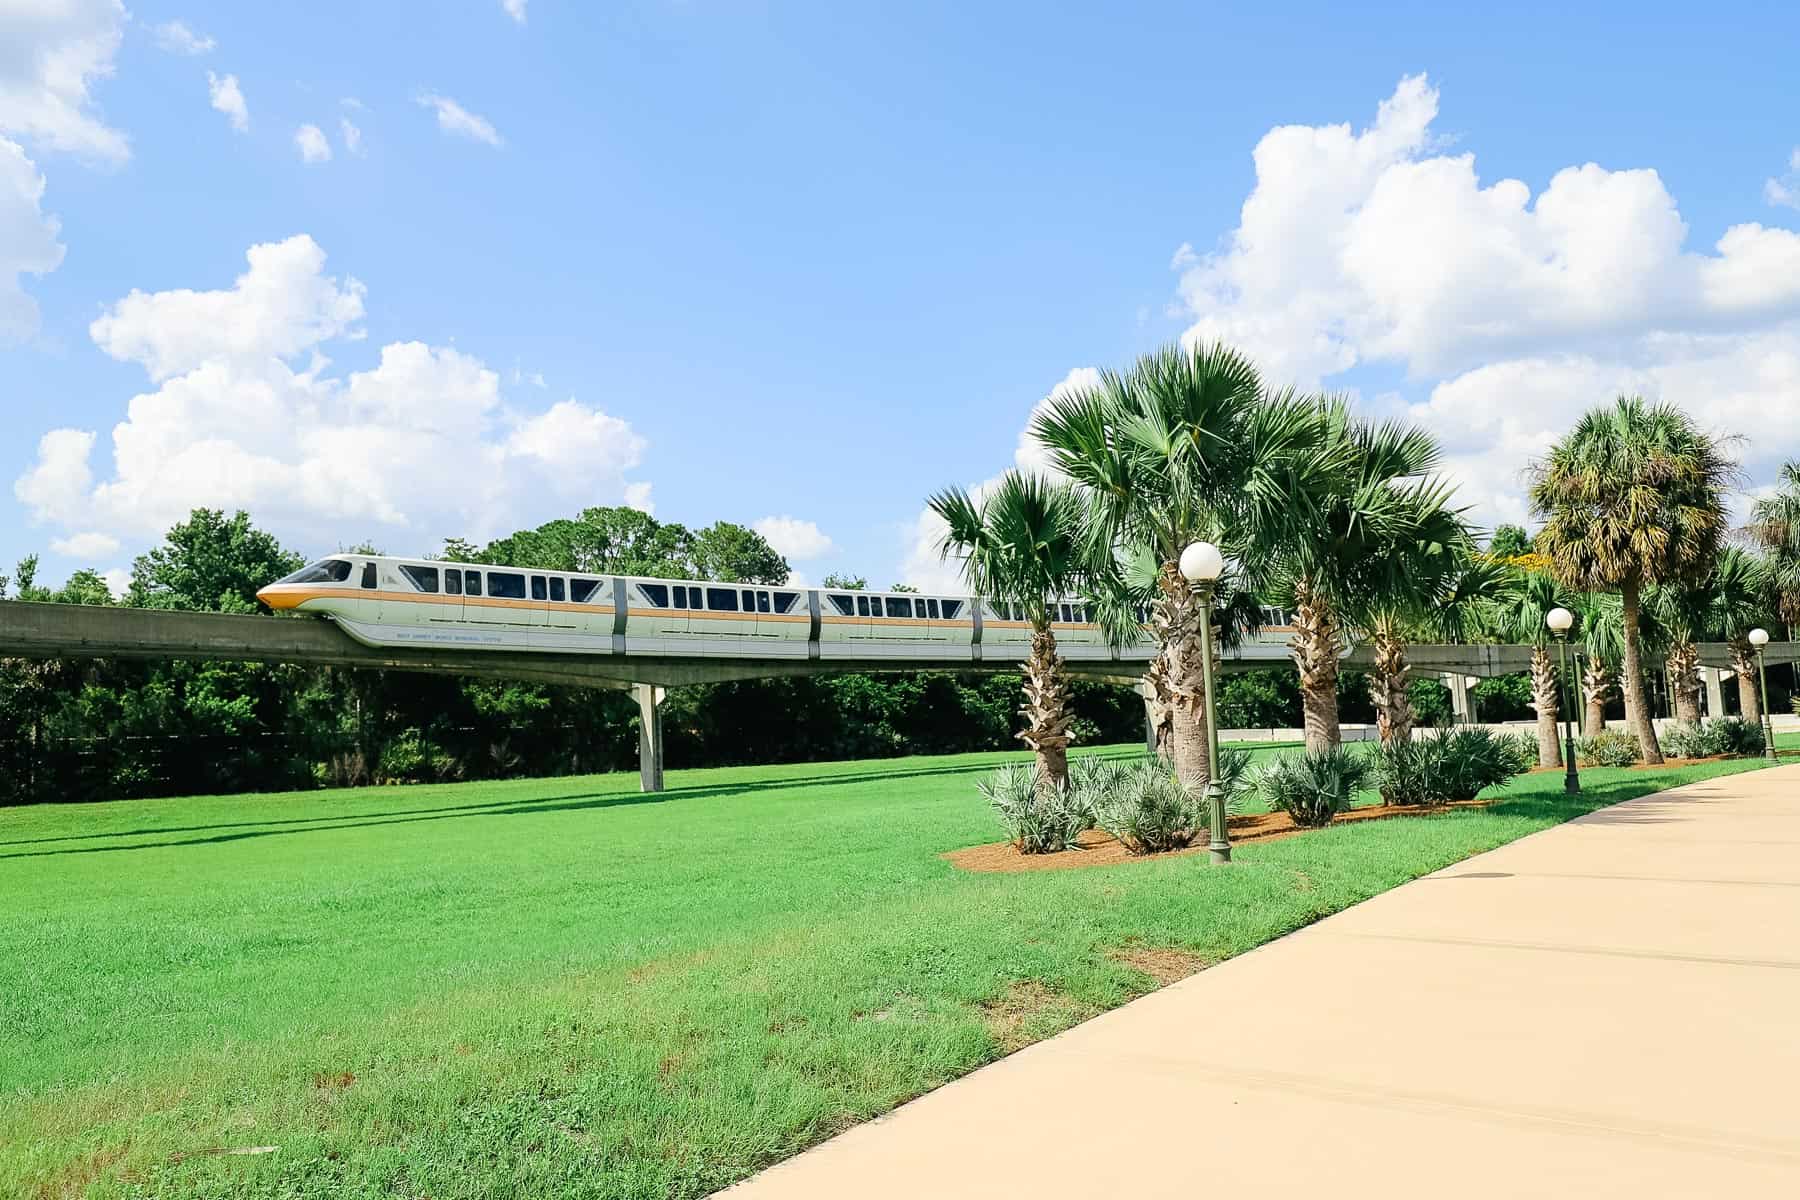 Monorail Peach passes by the walkway from Magic Kingdom to Grand Floridian. 